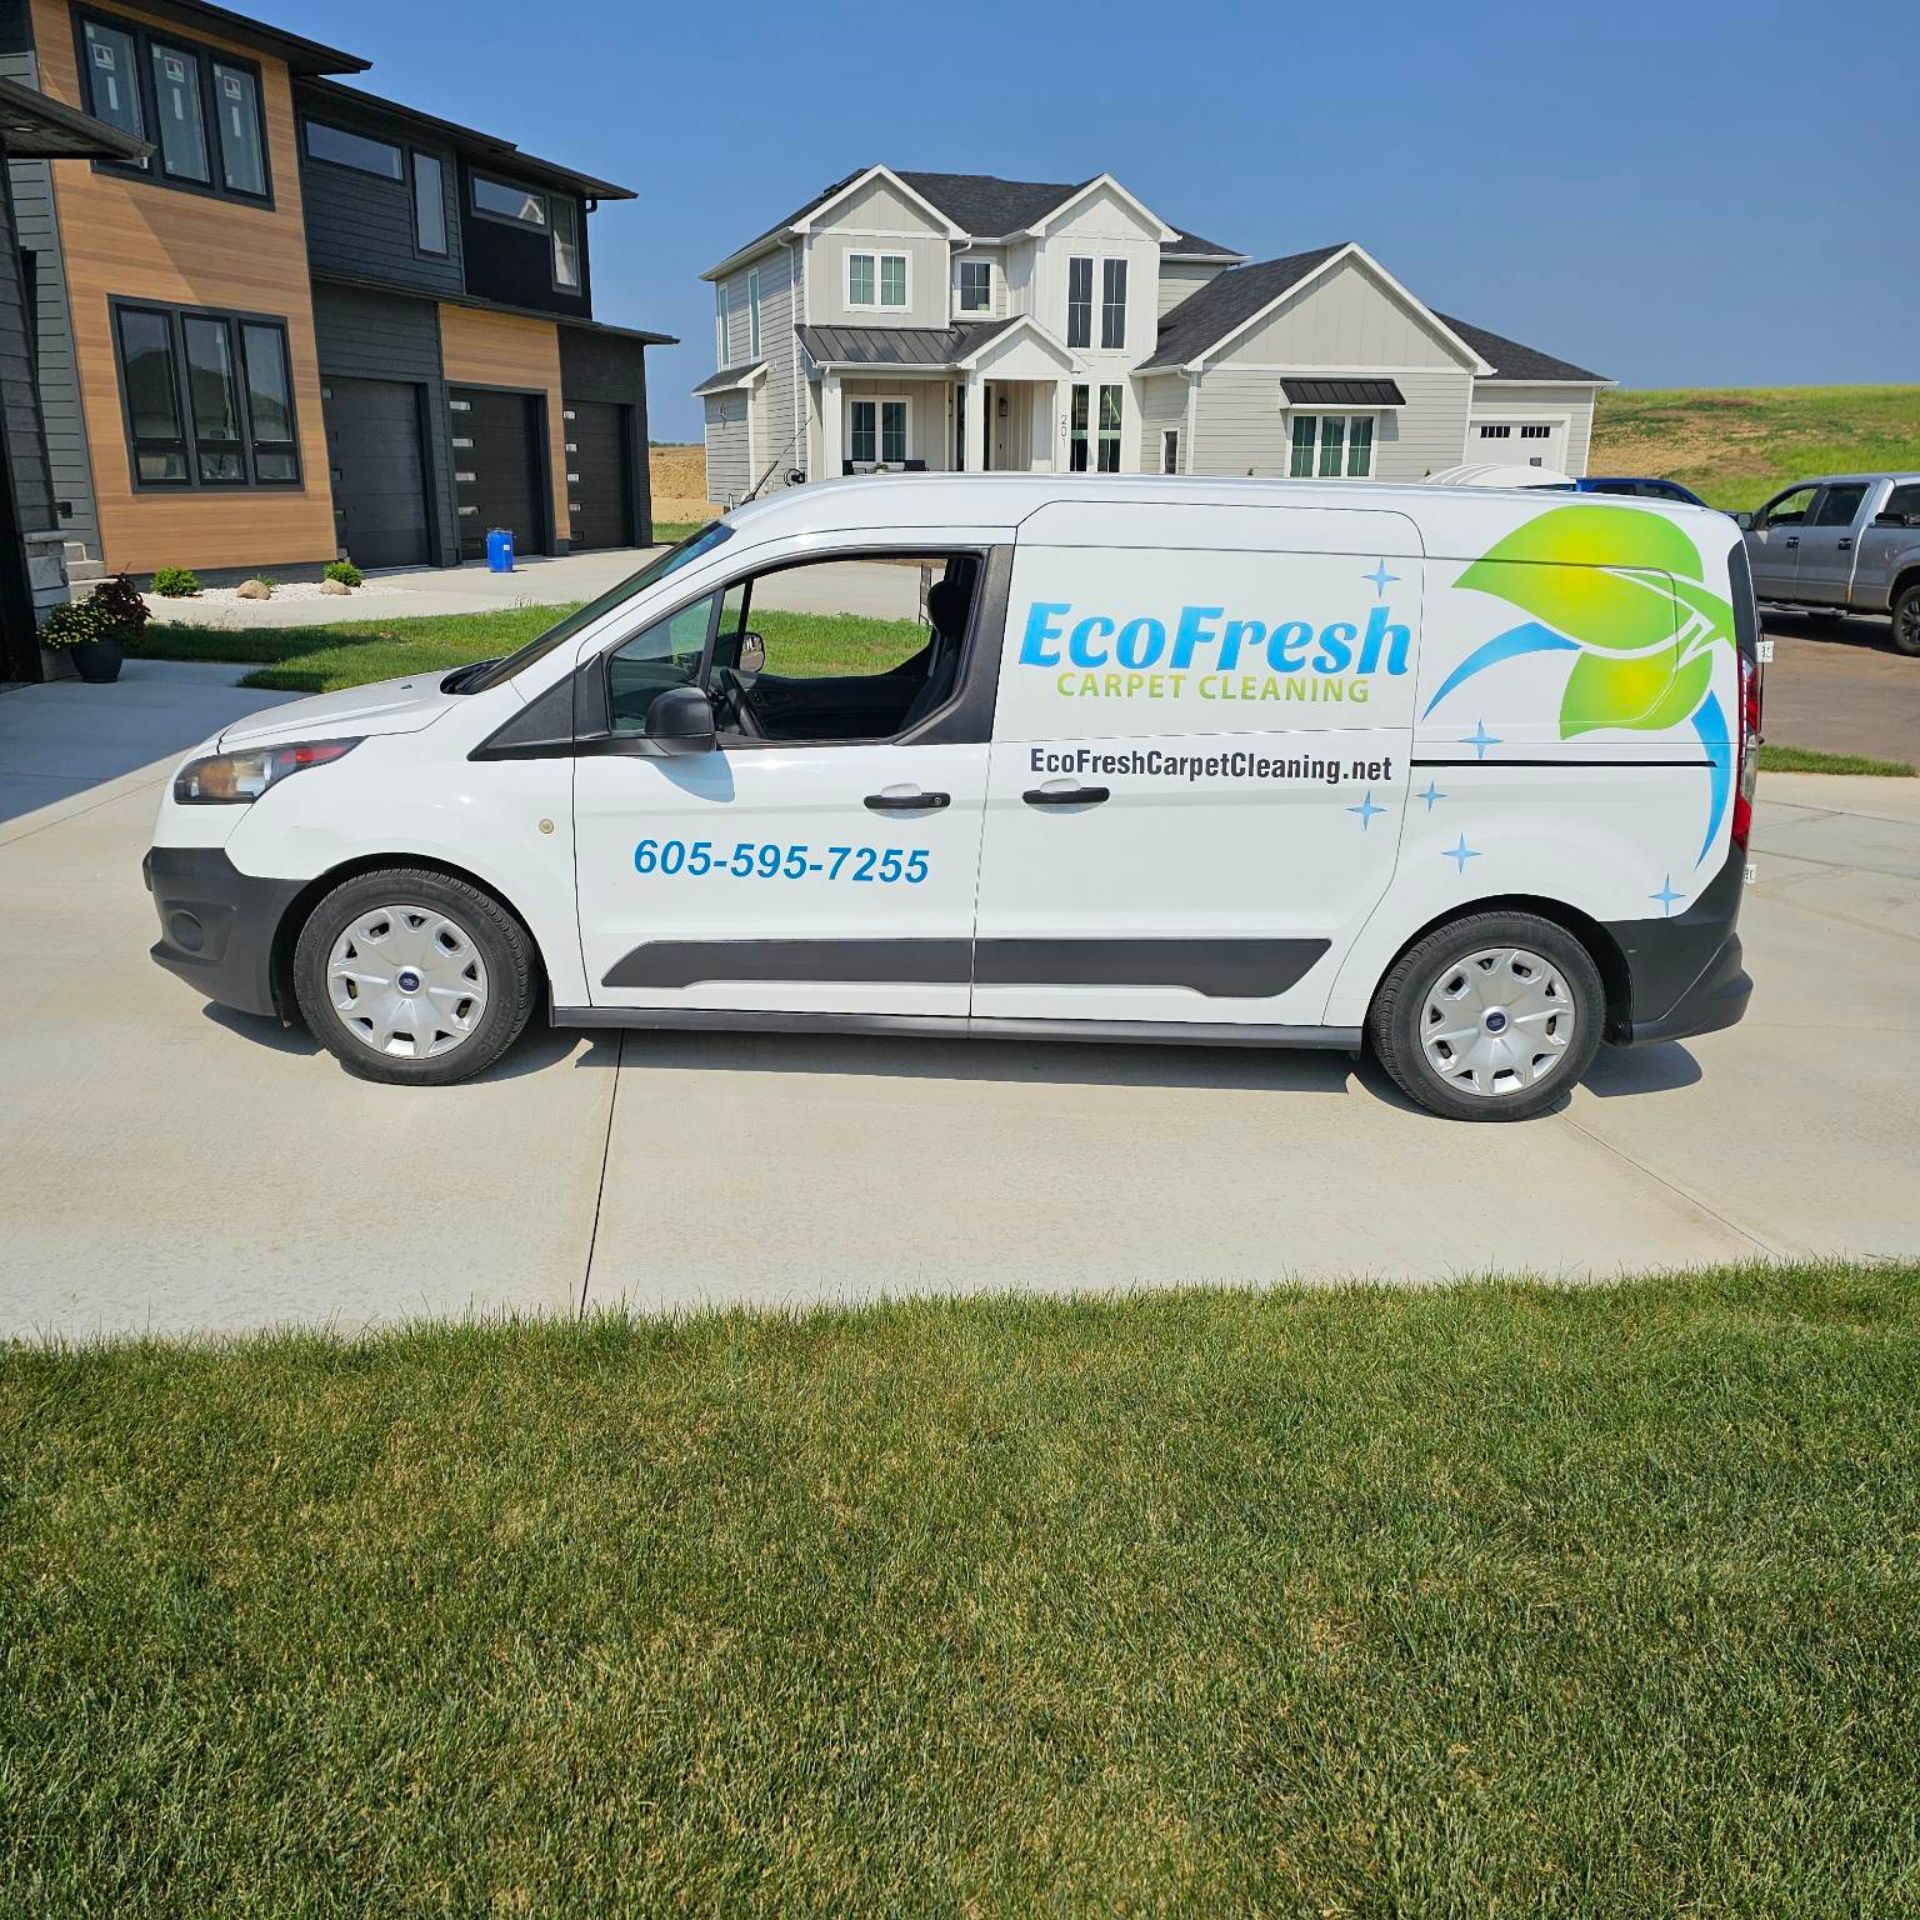 Carpet Cleaning In Minnehaha Sd